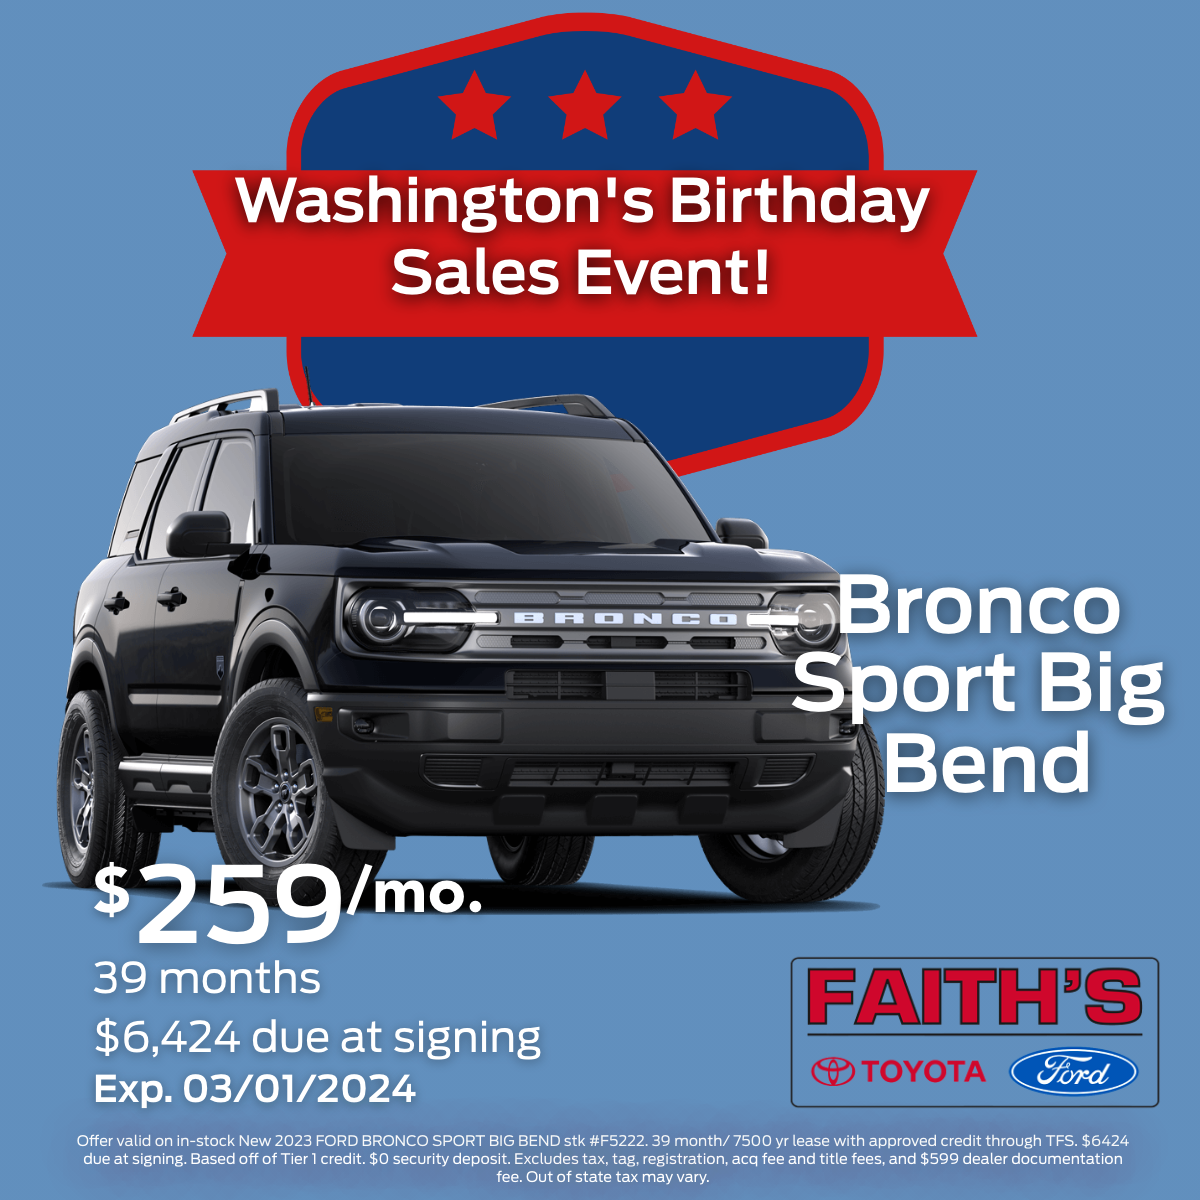 2023 Ford Bronco Sport Big Bend Lease Offer | Faiths Auto Group